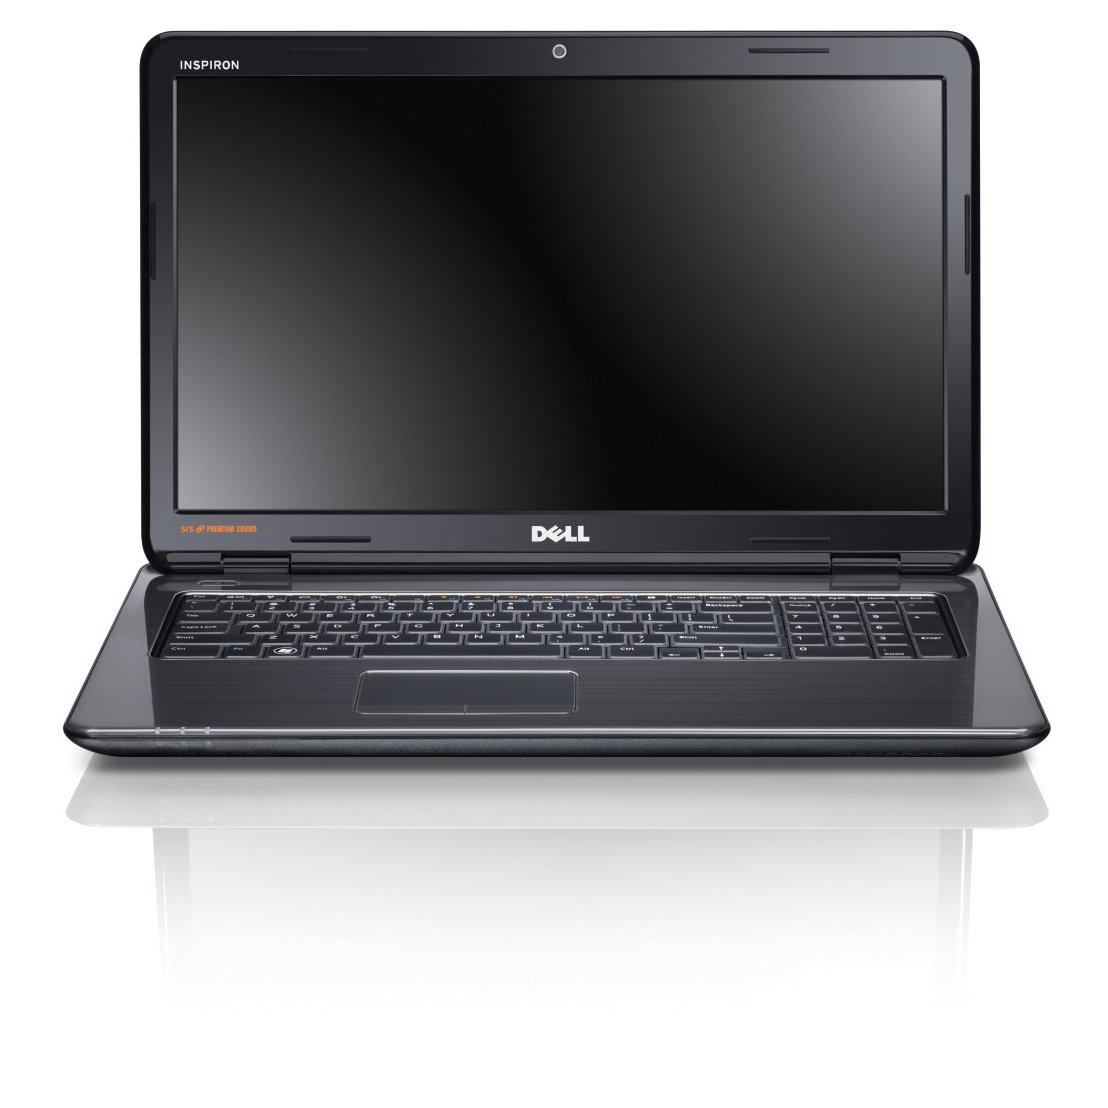 http://thetechjournal.com/wp-content/uploads/images/1201/1327168457-dell-inspiron-17rn-i17rn4709dbk-173inch-laptop-3.jpg